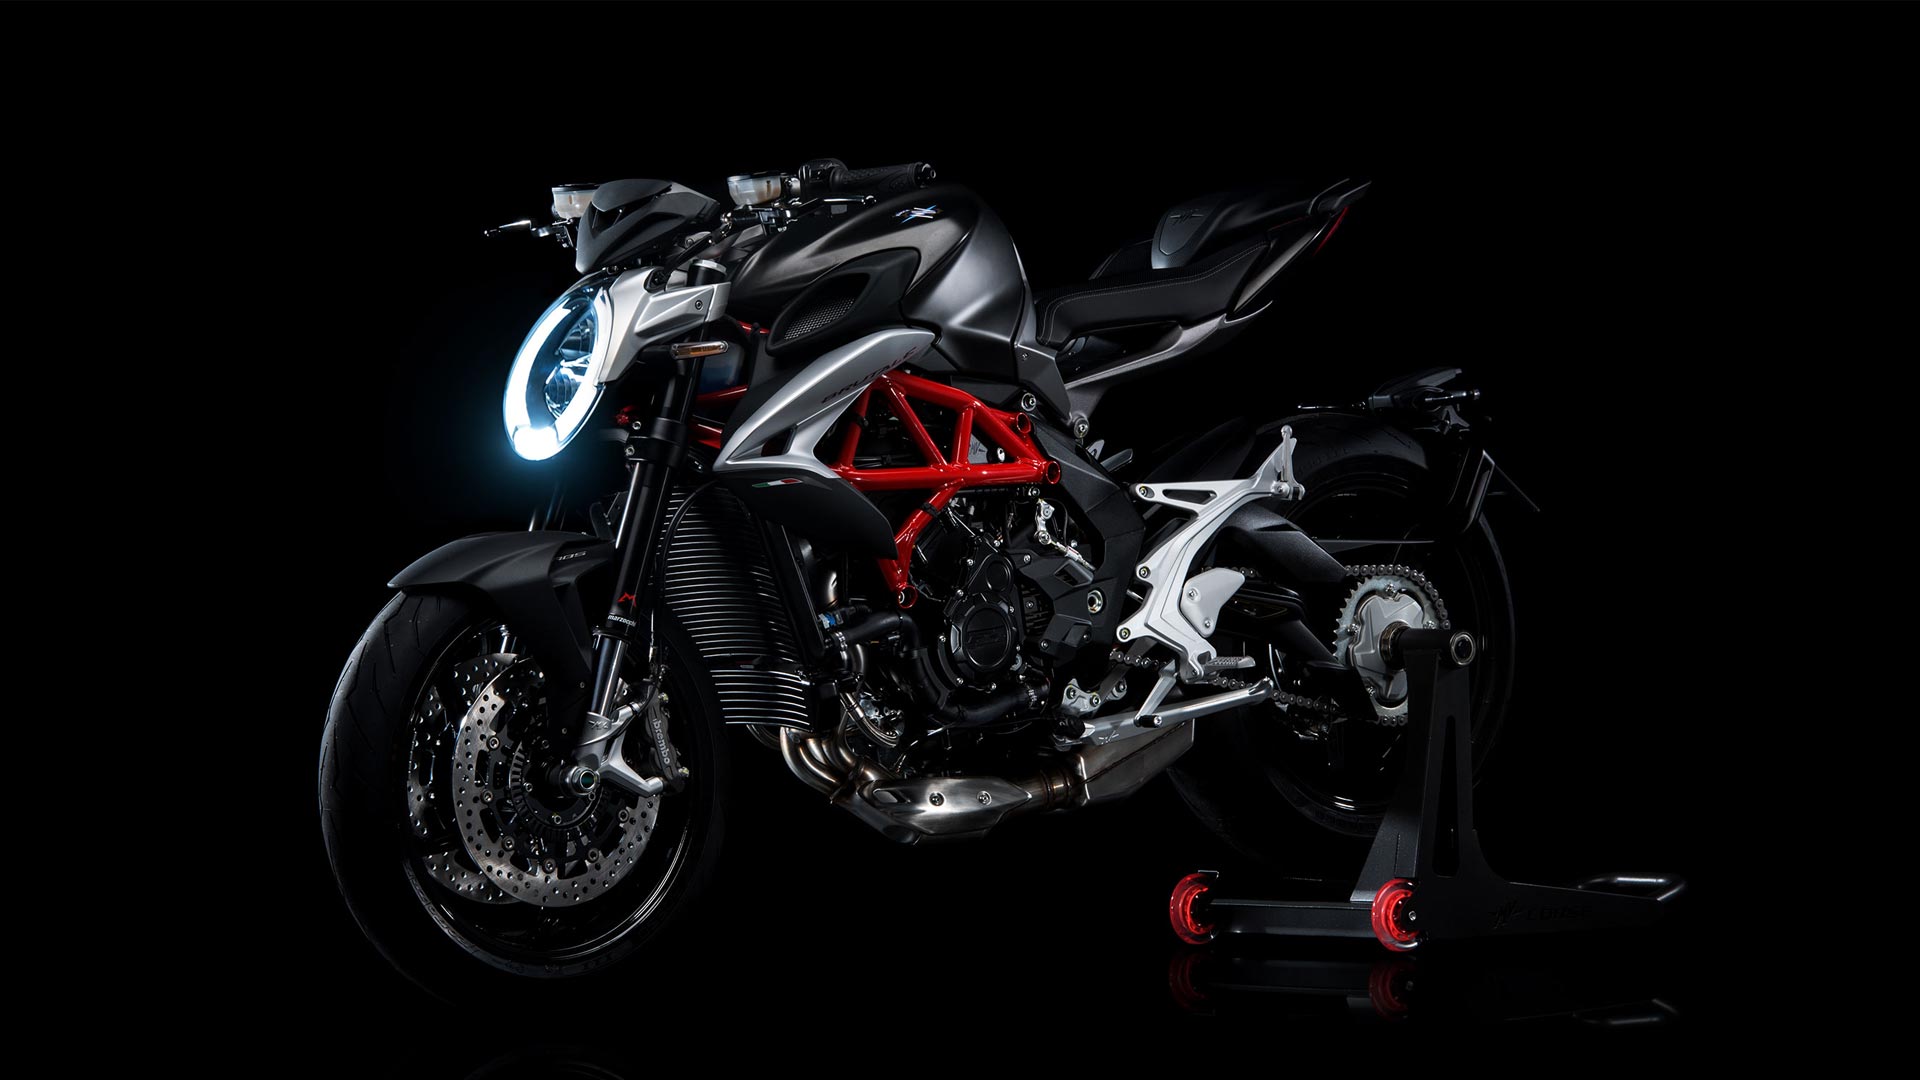 MV Agusta Brutale 800 launched at Rs 15.59 lakh - Autodevot